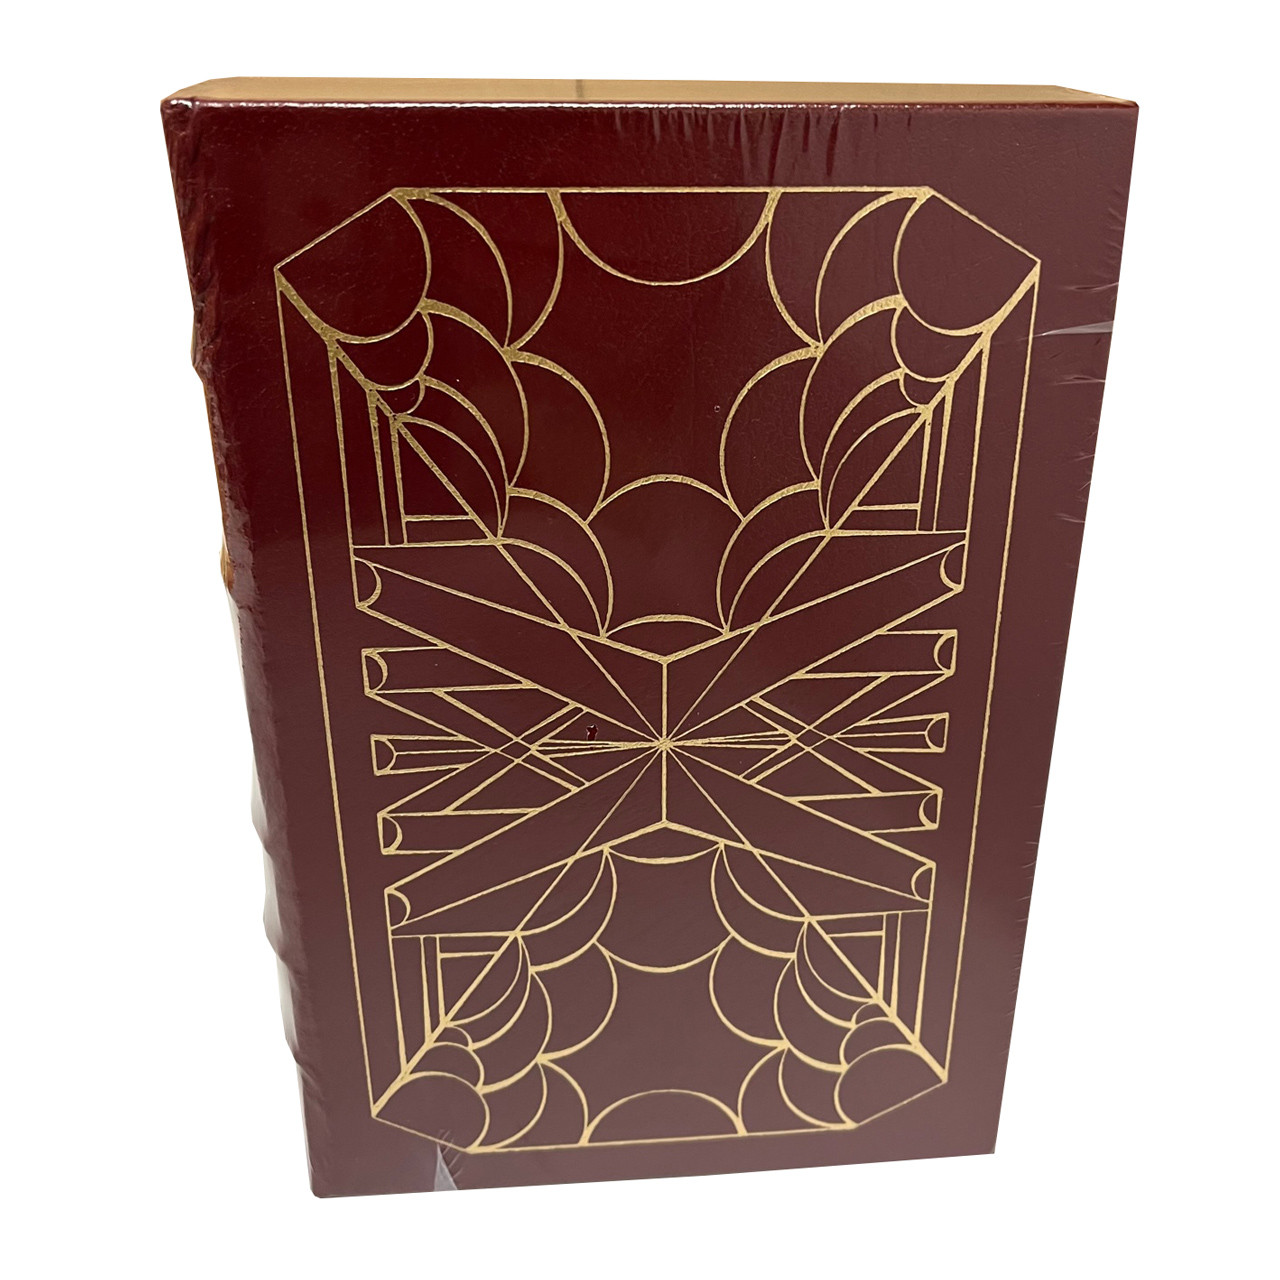 Sarah Zettel "Kingdom of Cages"  Signed First Edition, Leather Bound Collector's Edition w/COA [Sealed]